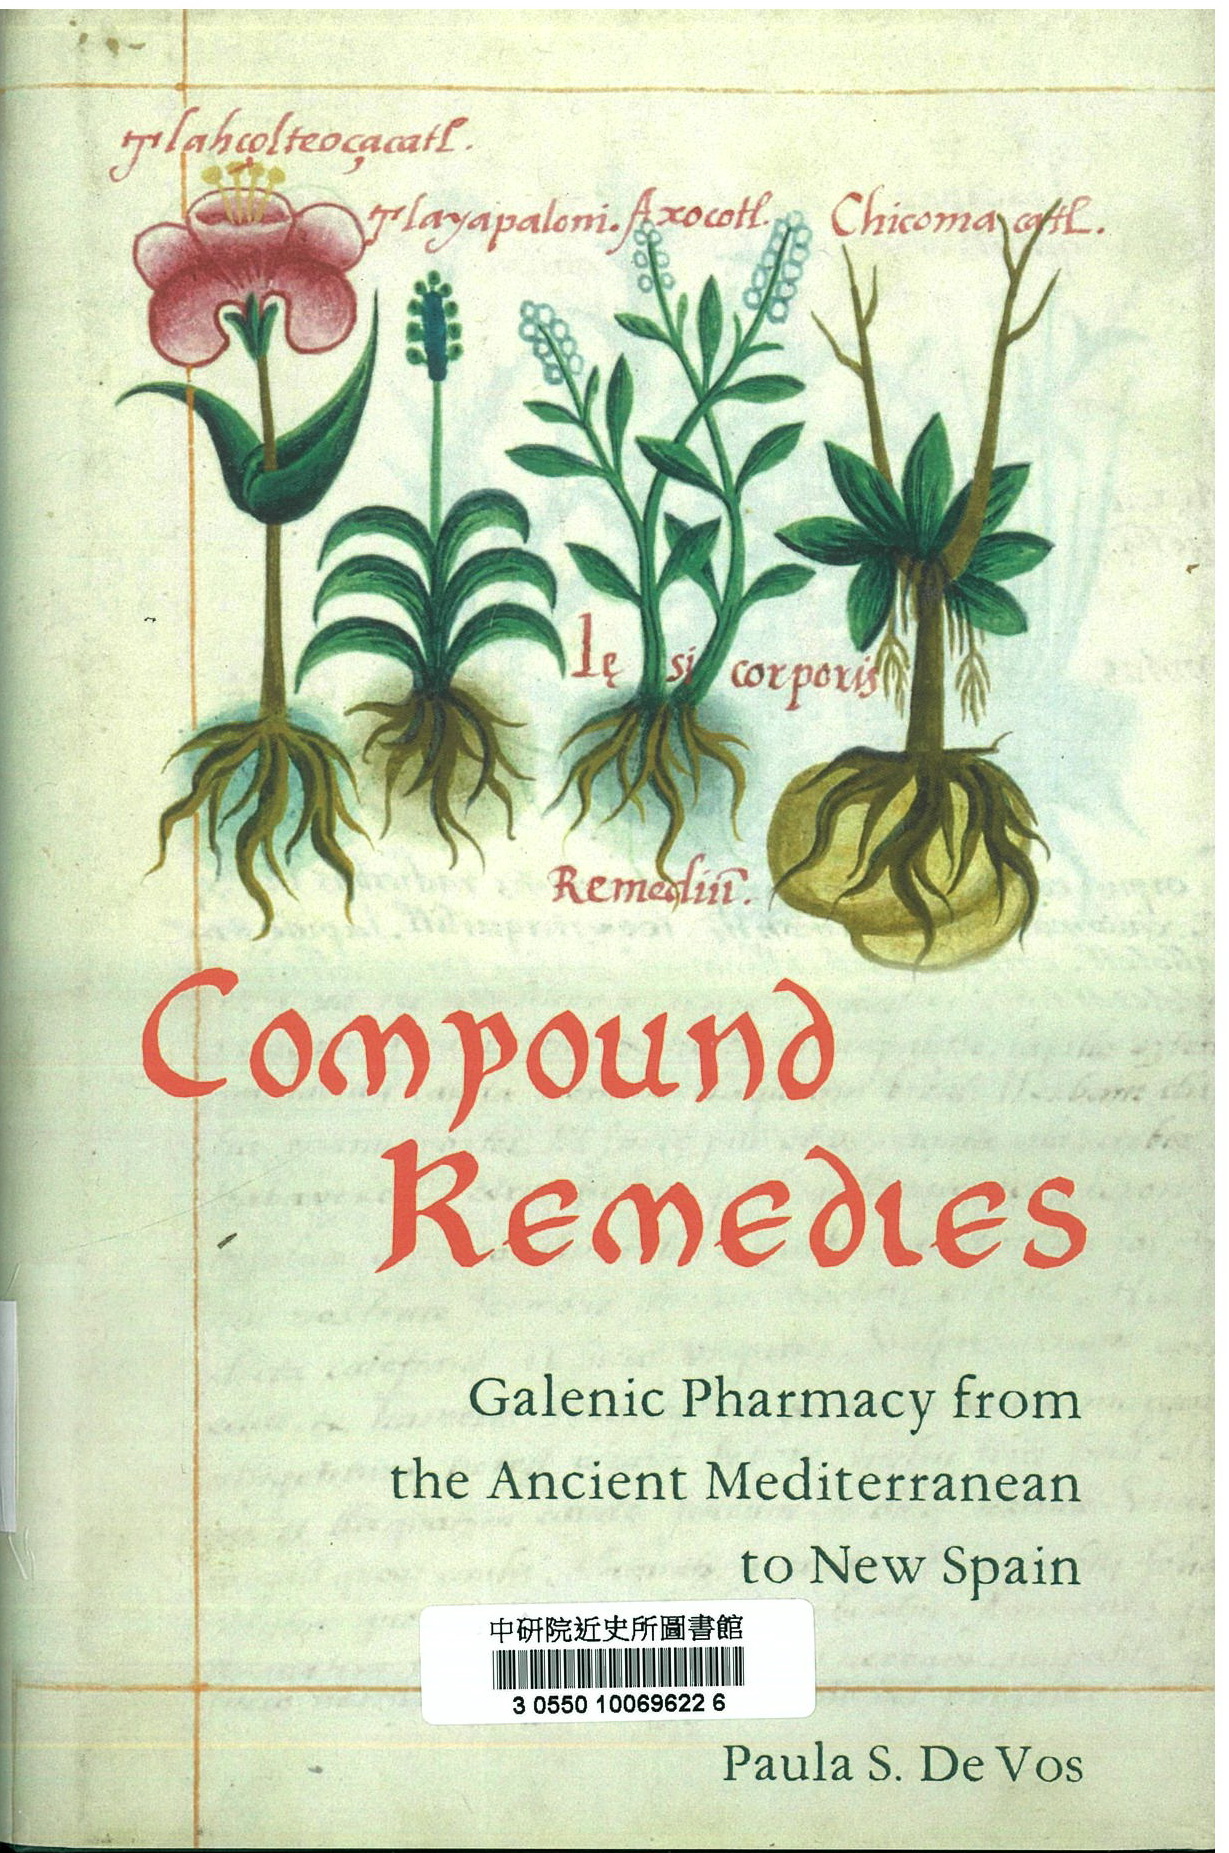 Compound remedies : Galenic pharmacy from the ancient Mediterranean to New Spain